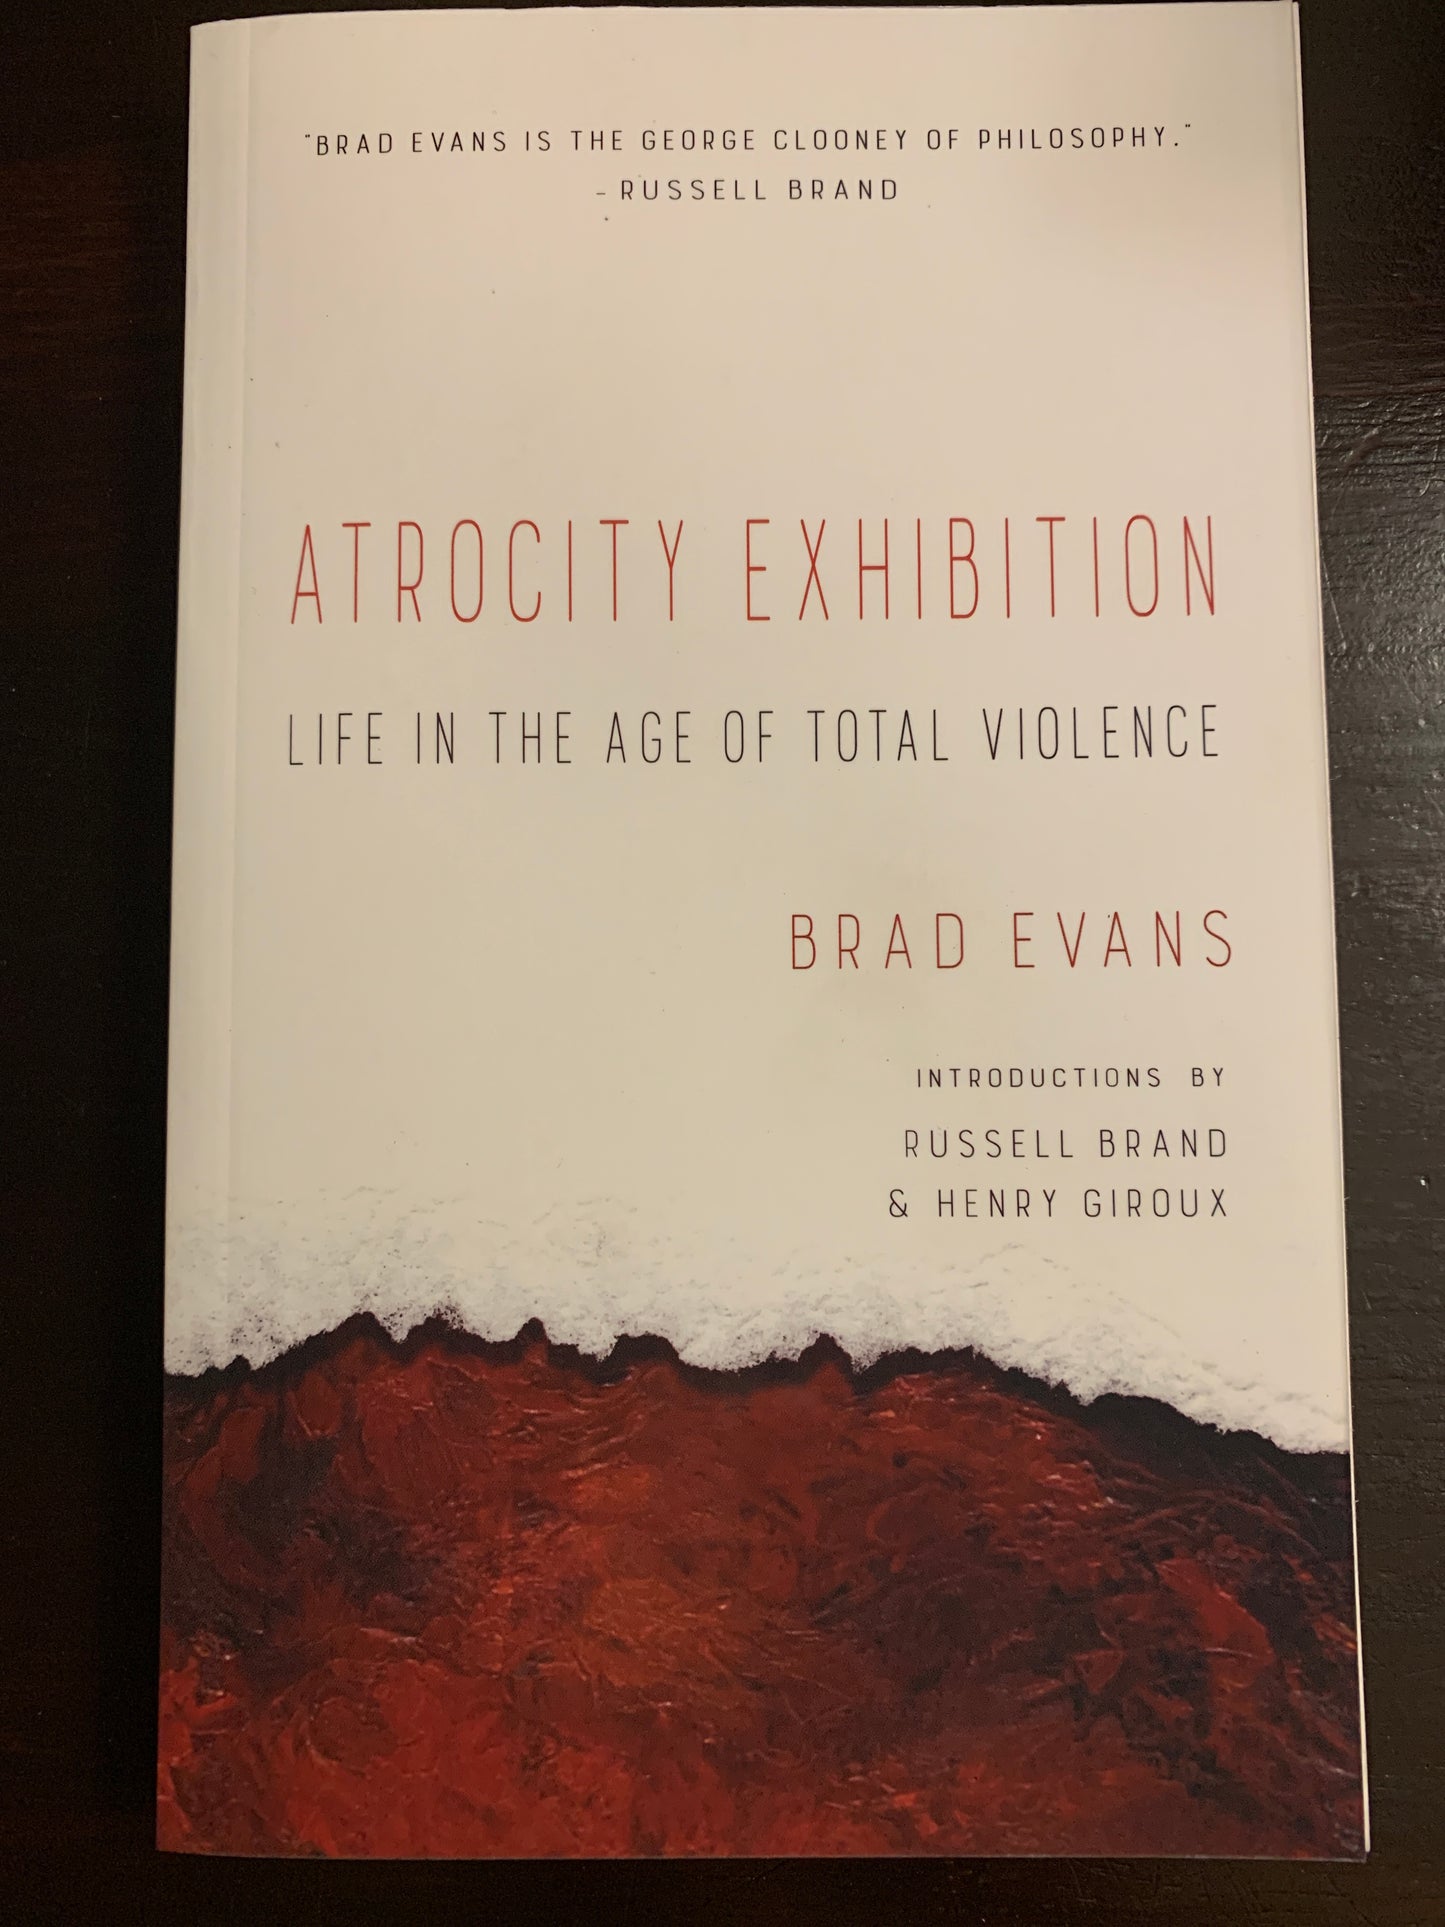 Atrocity Exhibition: Life in the age of total violence